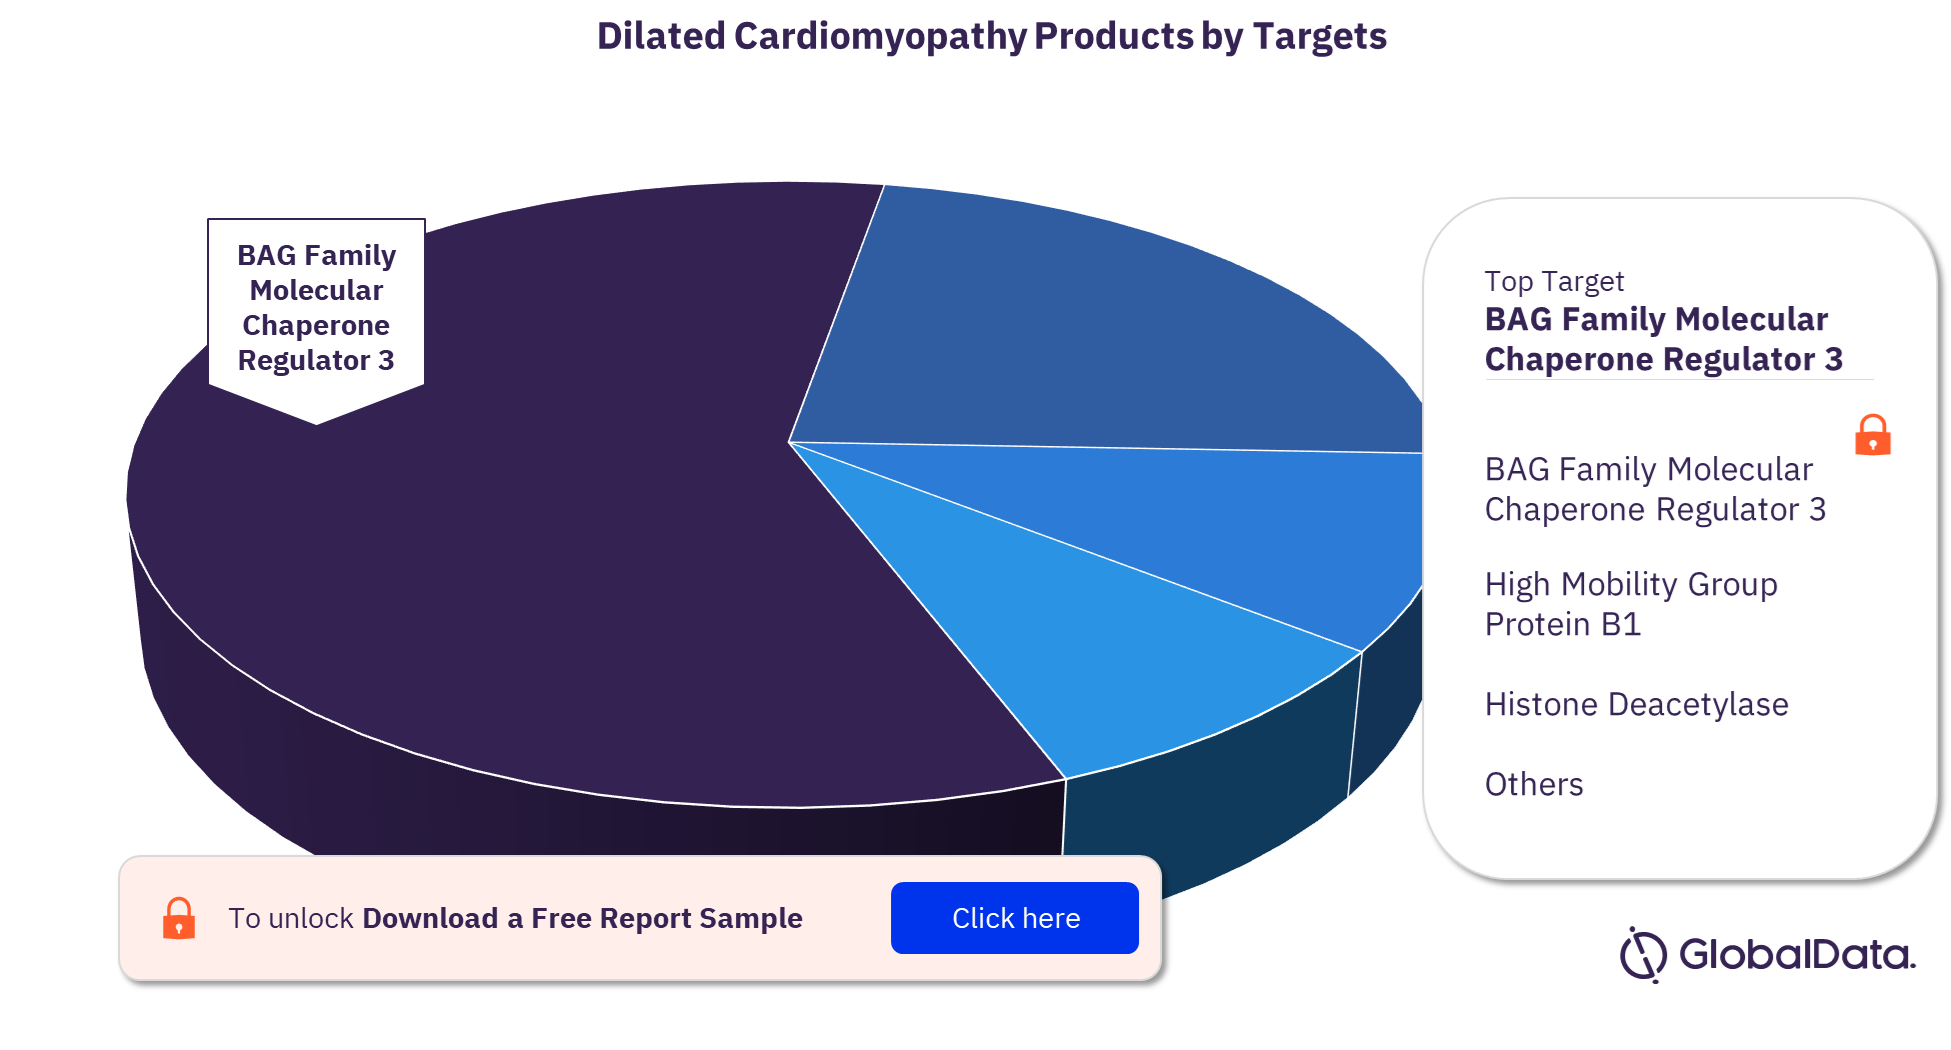 Dilated Cardiomyopathy Pipeline Products by Targets